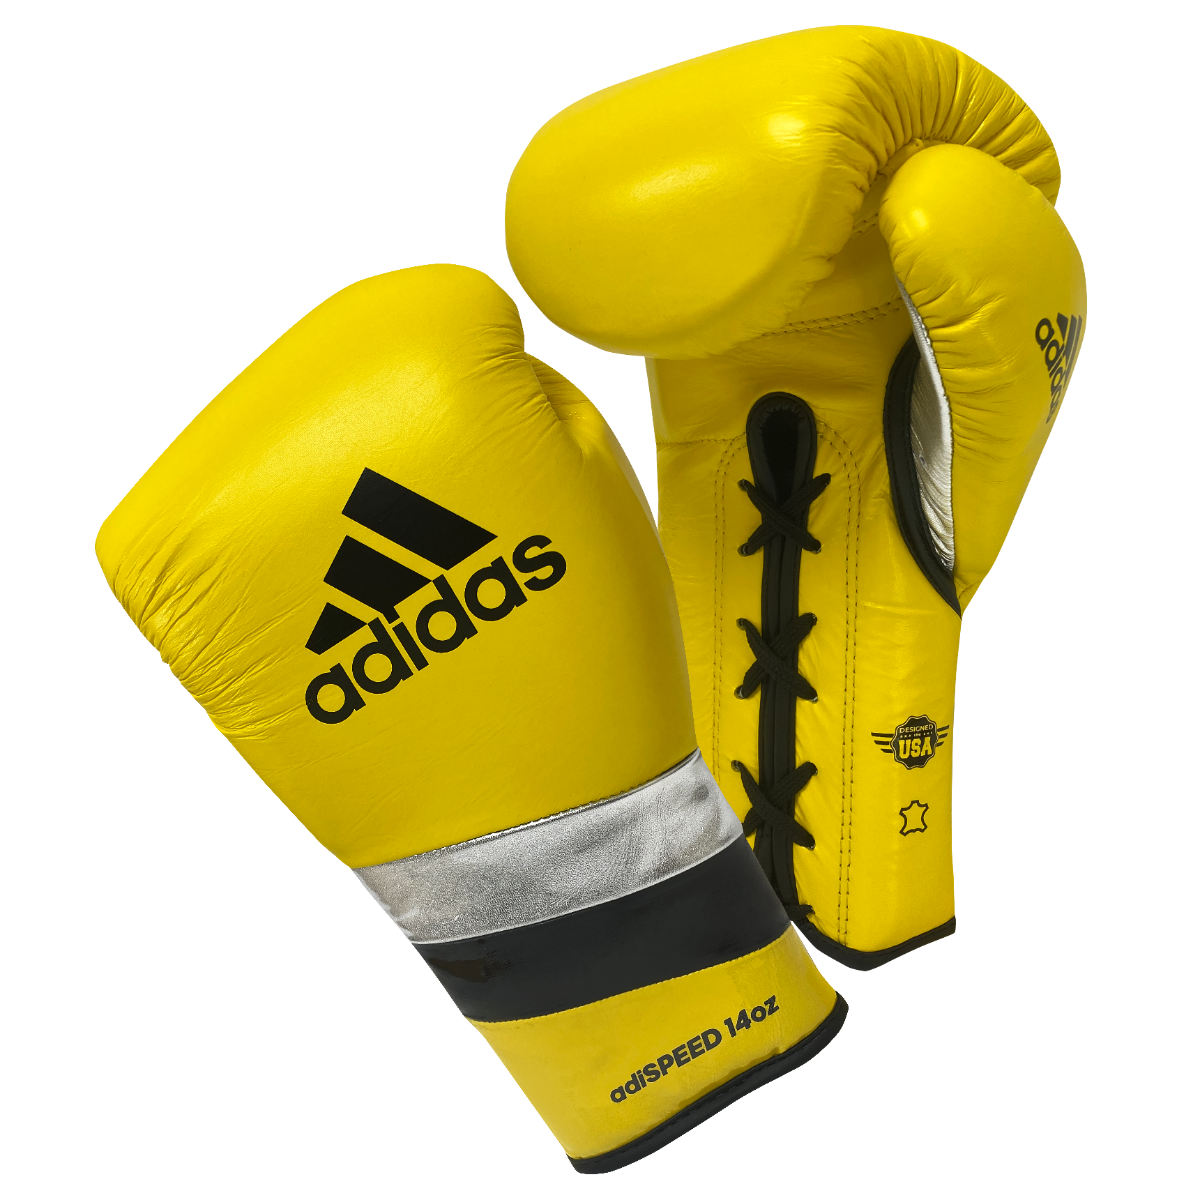 ADIDAS ADISPEED LACE BOXING GLOVES - LIMITED EDITION